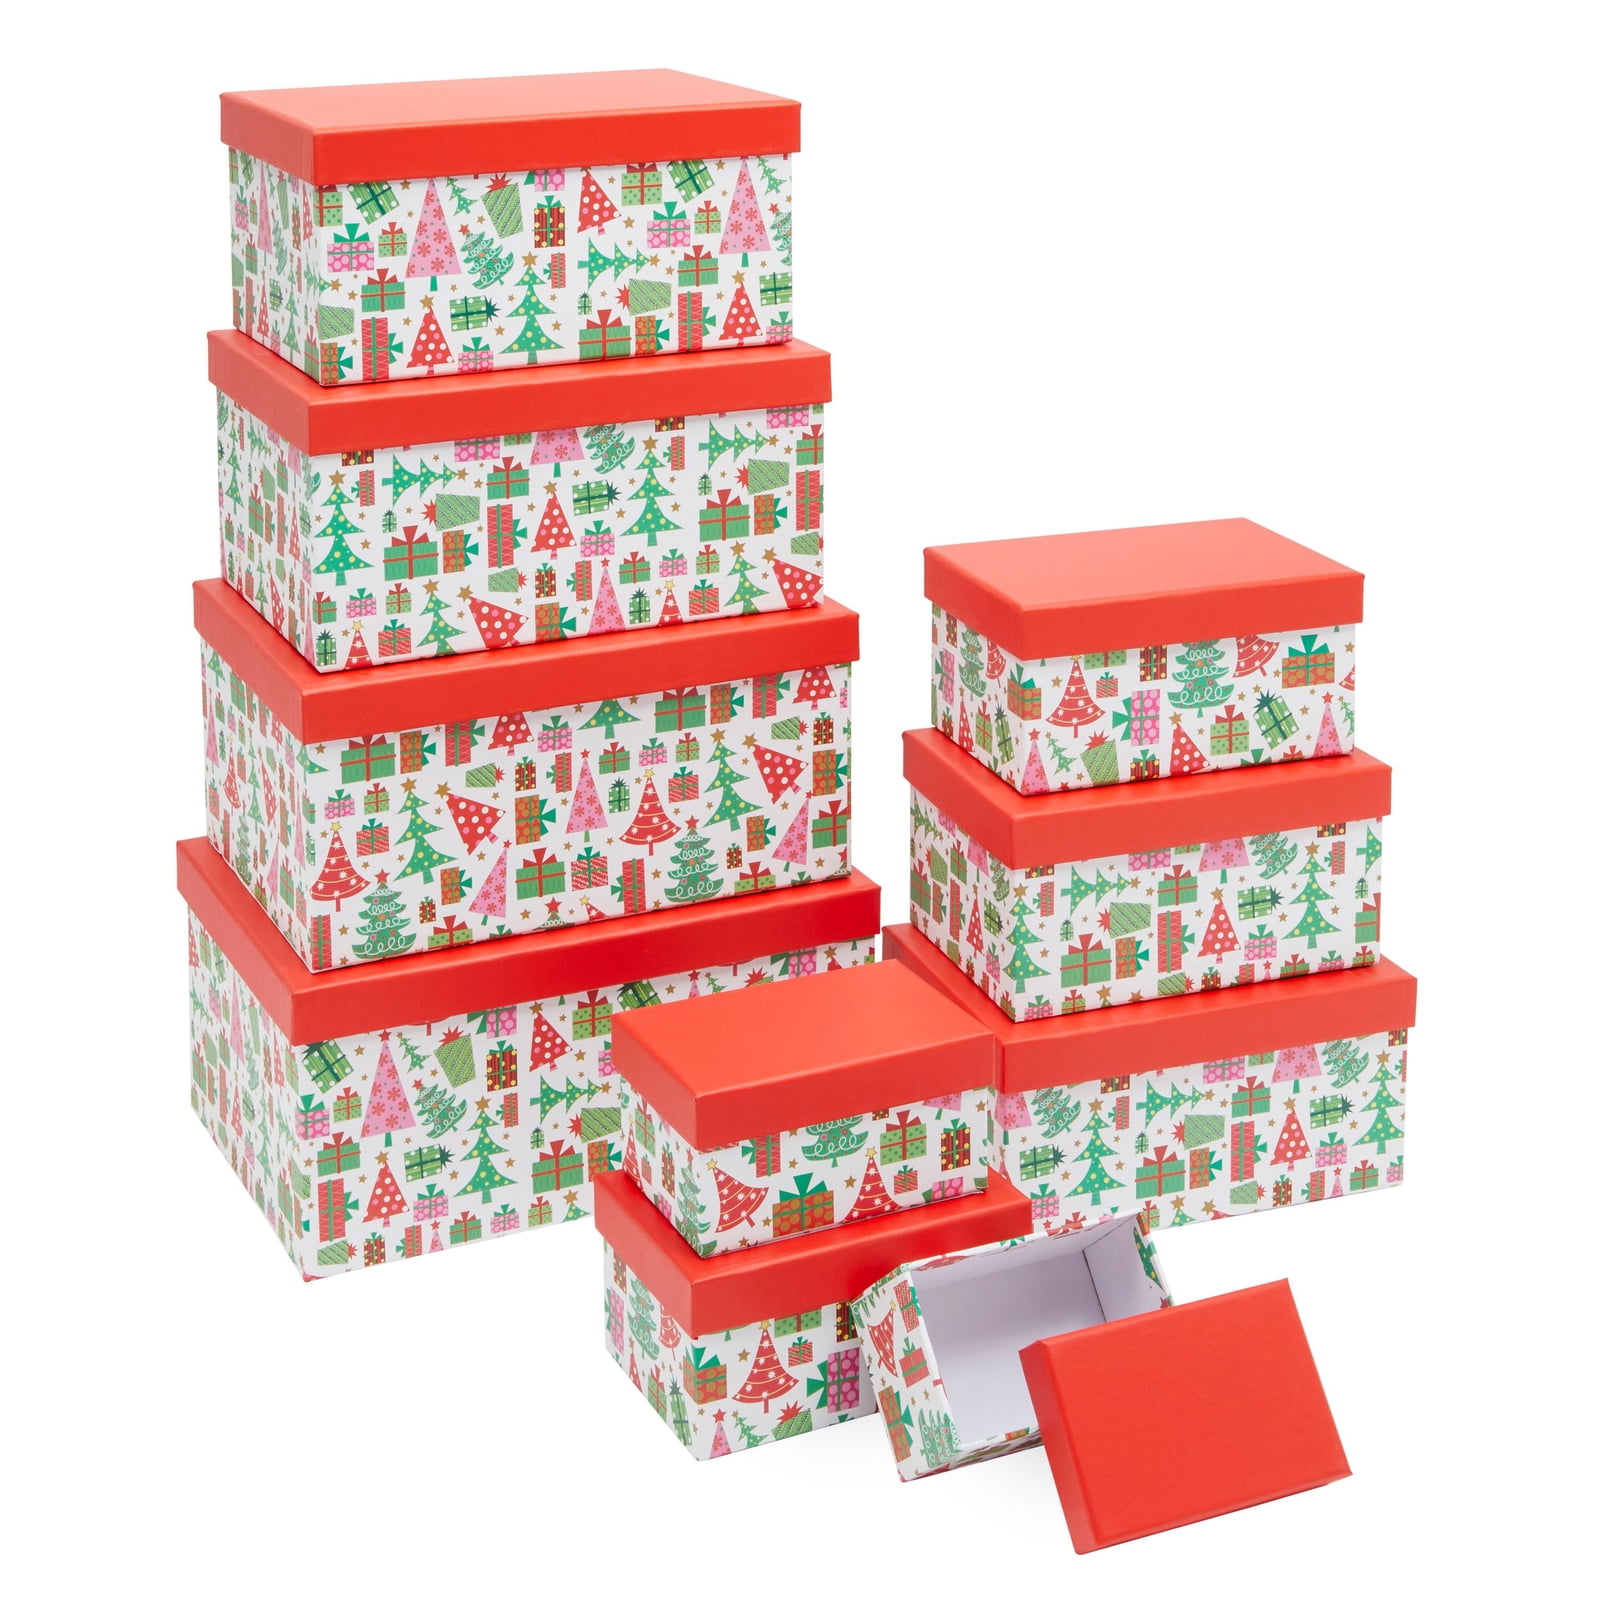 Pile of Wrapped Christmas Gift Boxes Line Drawing - Christmas